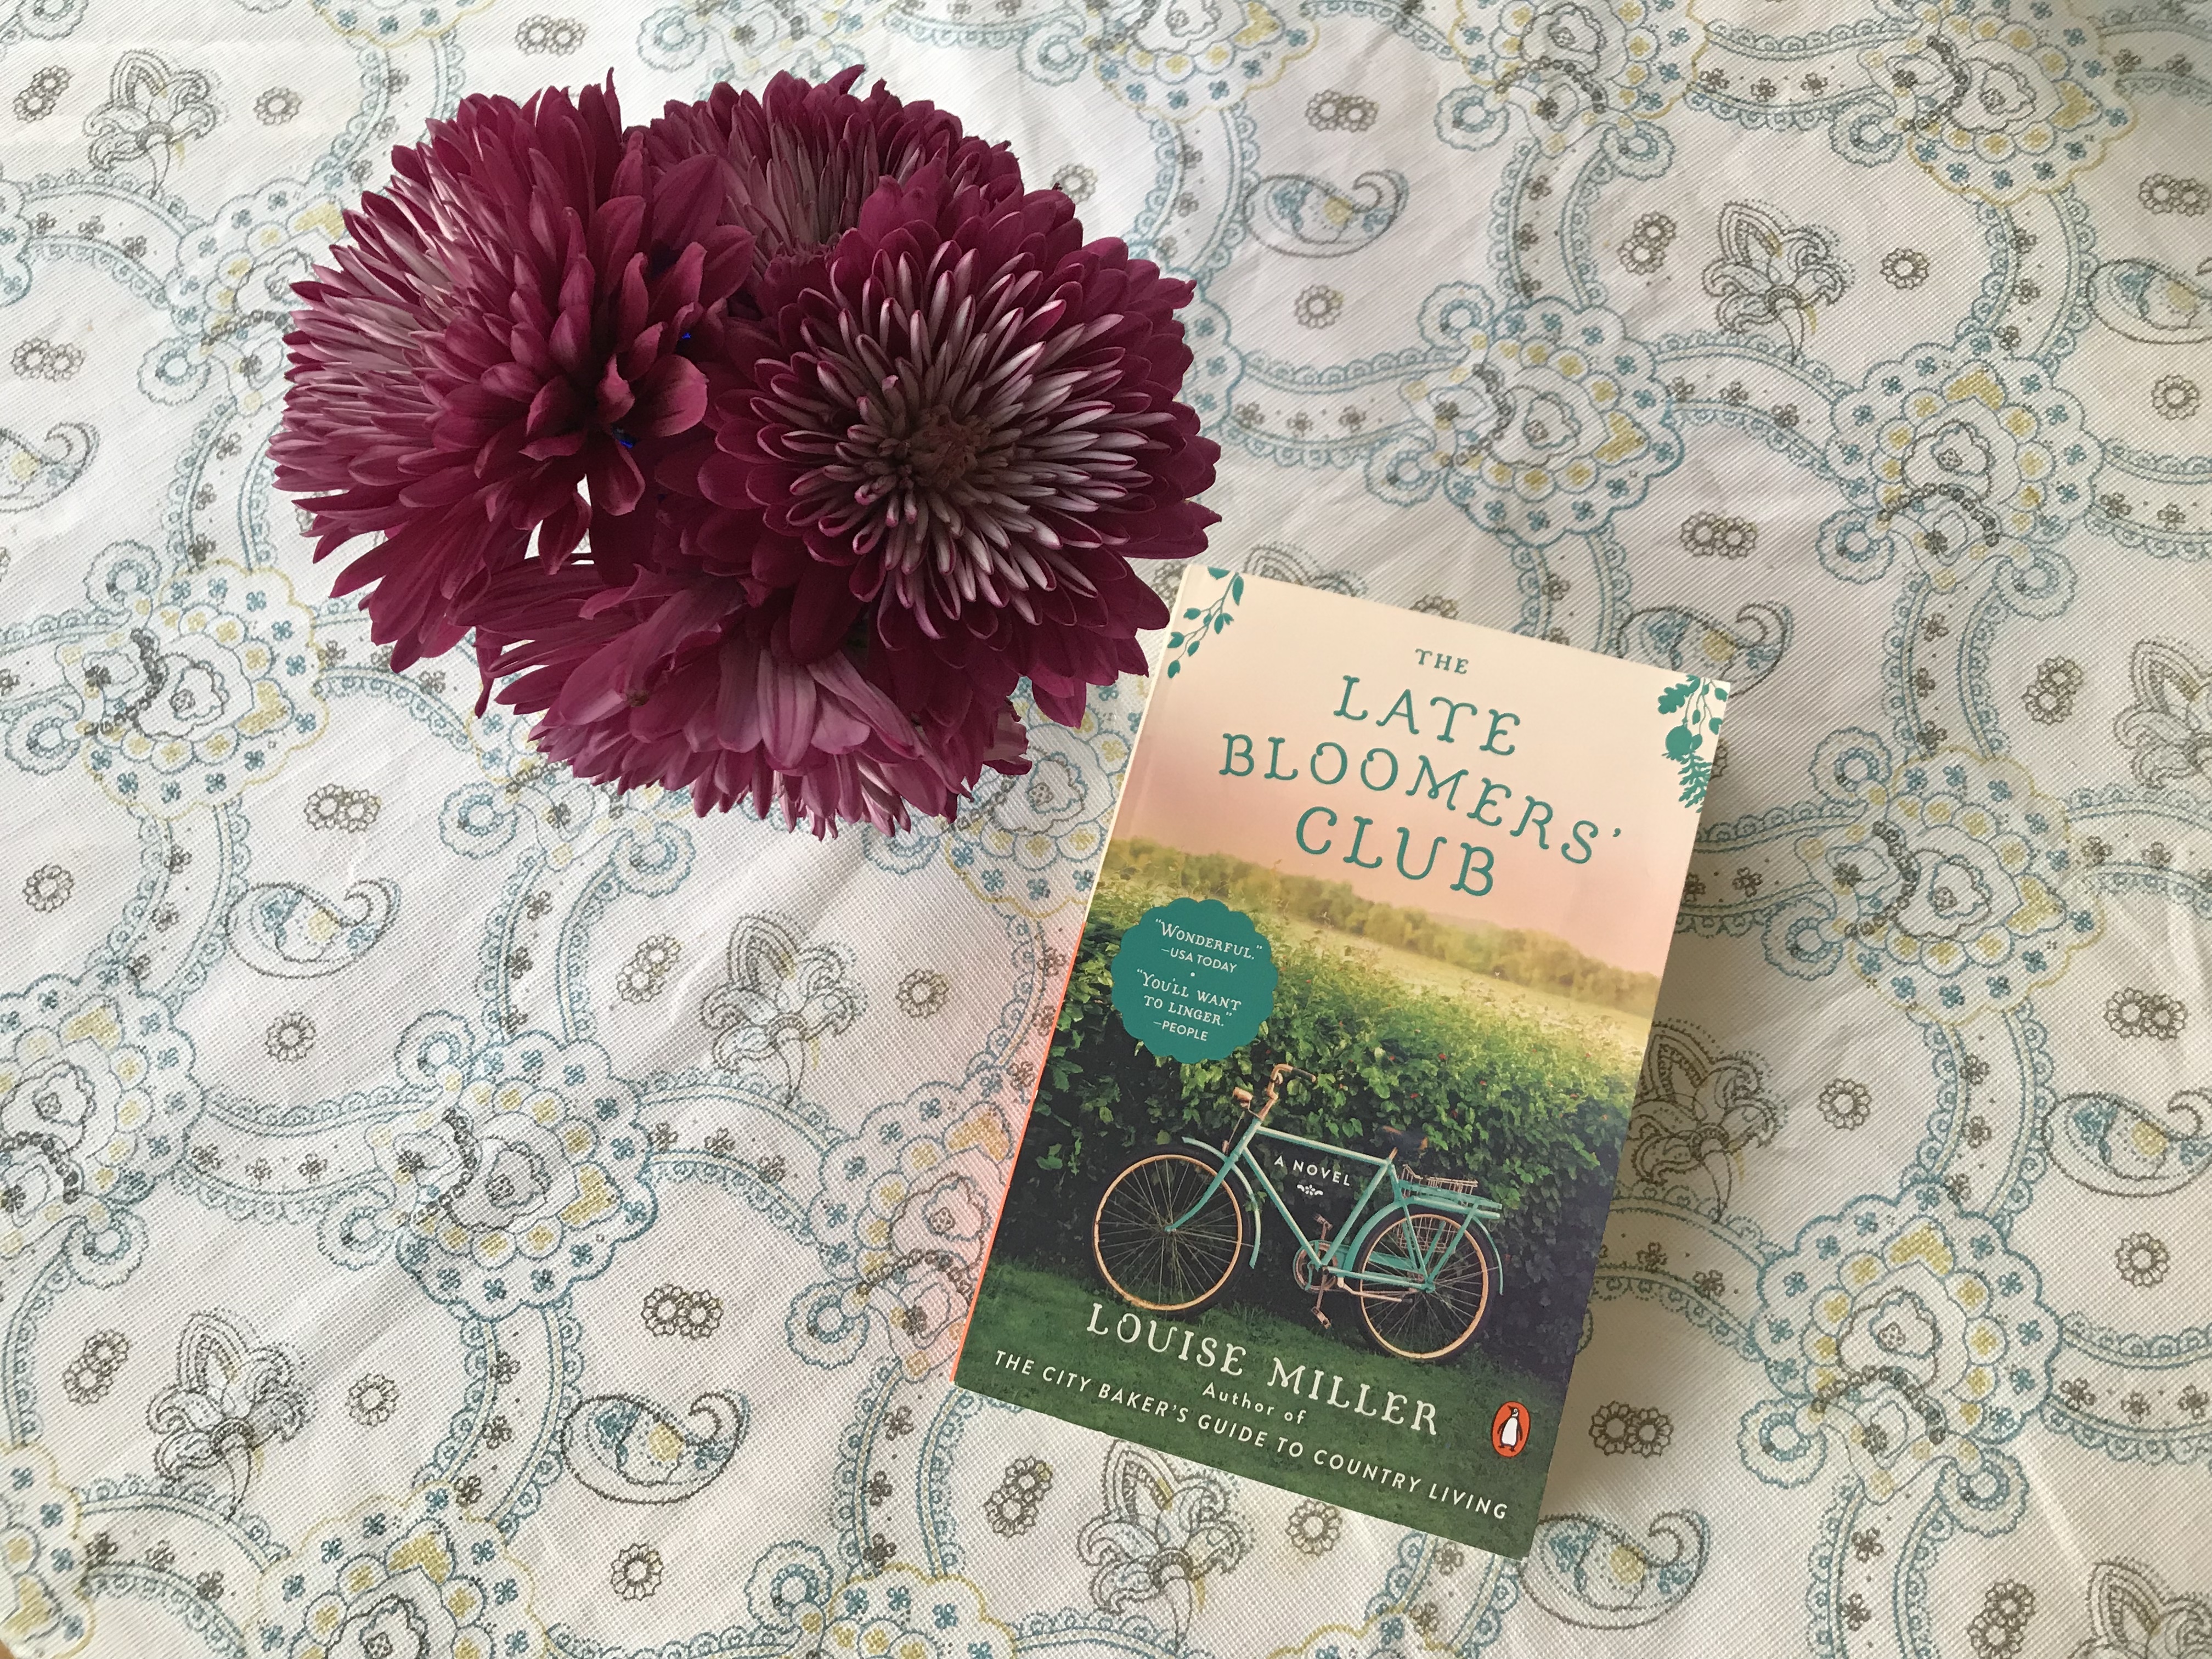 The Late Bloomers' Club by Louise Miller: As Warm, Winning and